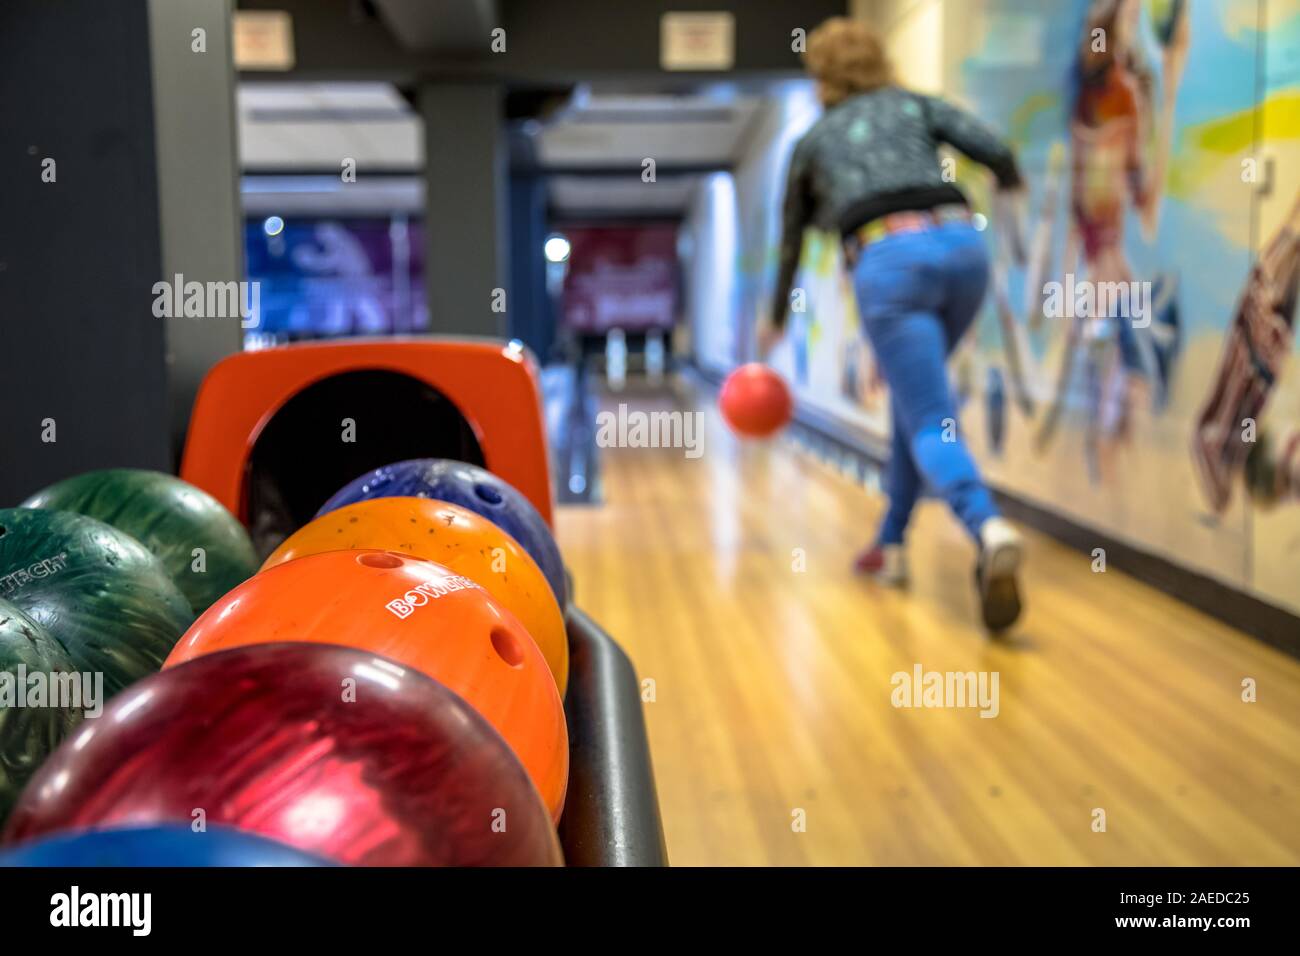 Woman throwing bowling ball on indoor bowling alley Stock Photo